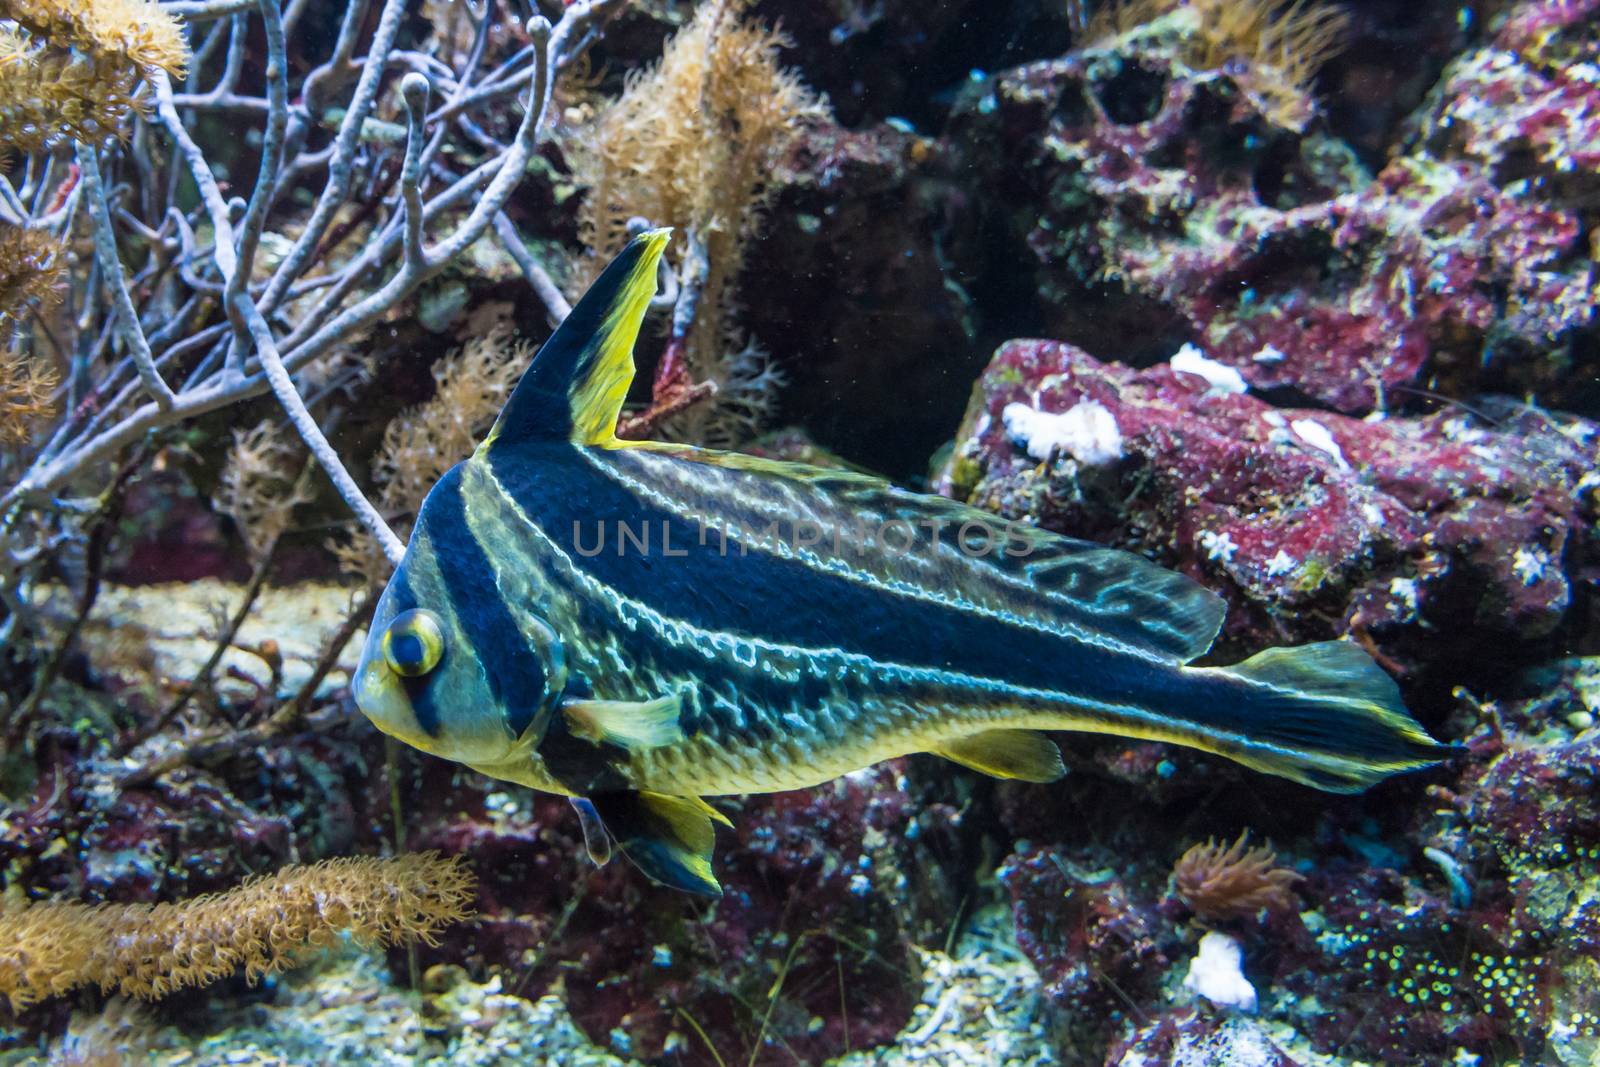 Black and yellow striped tropical wild jungle fish